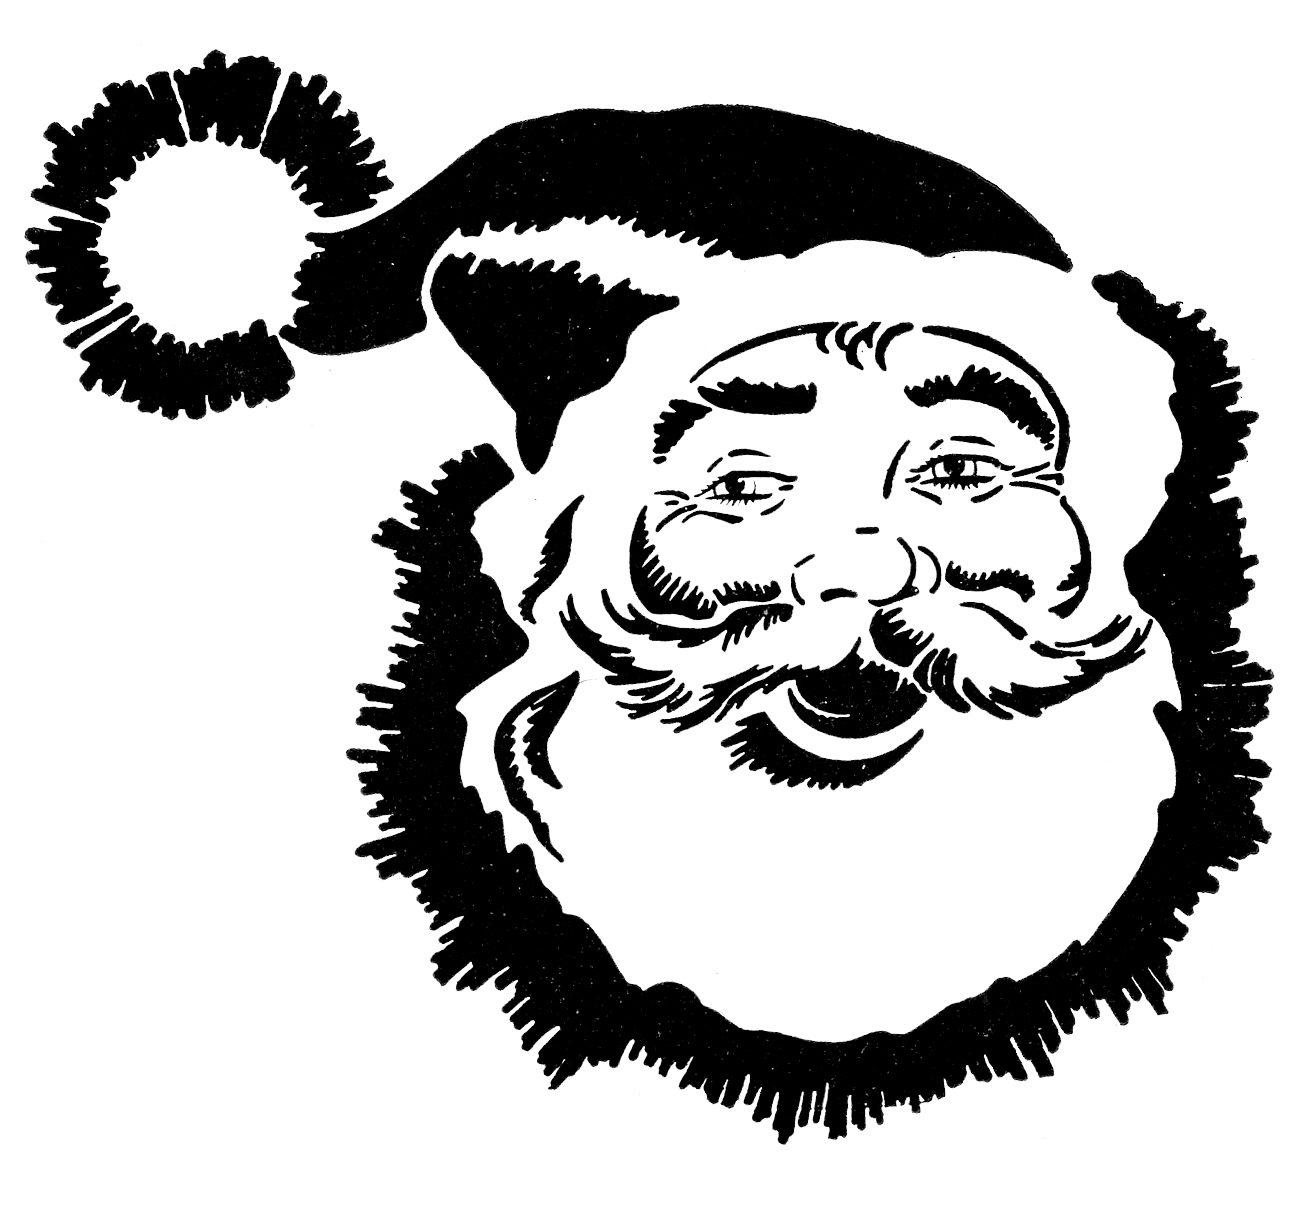 santa claus face clipart black and white